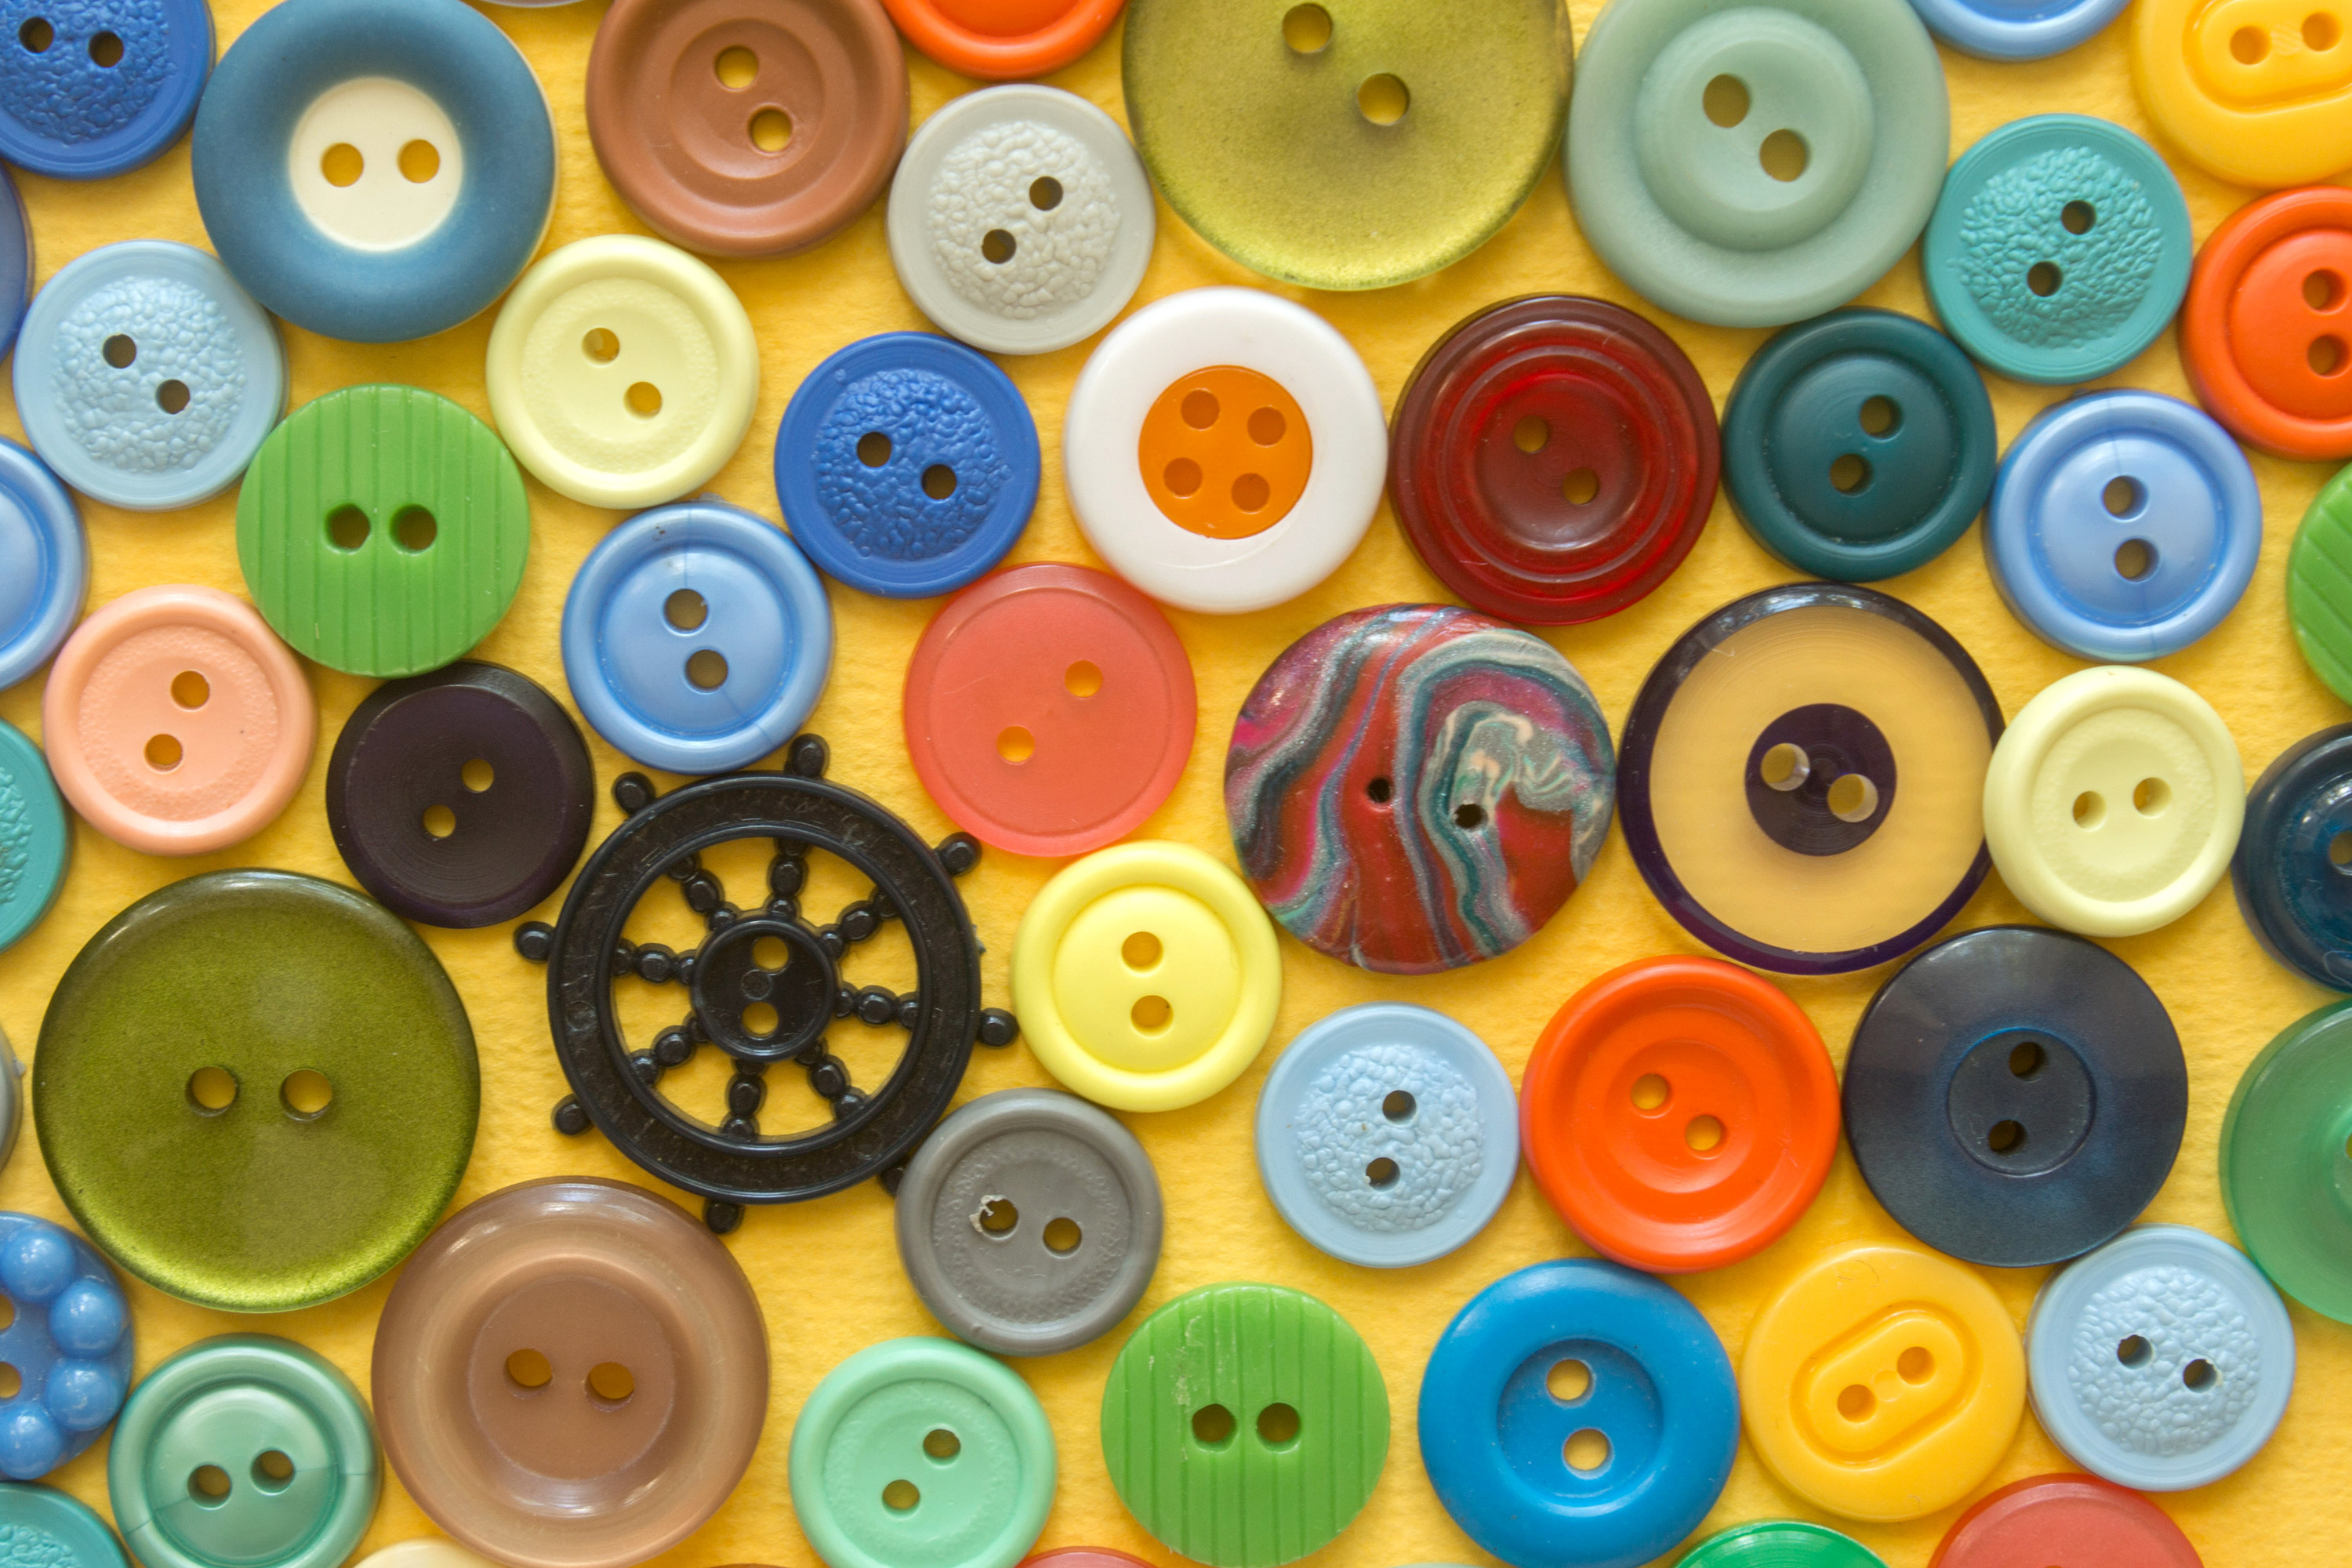 Multicolored buttons on a surface